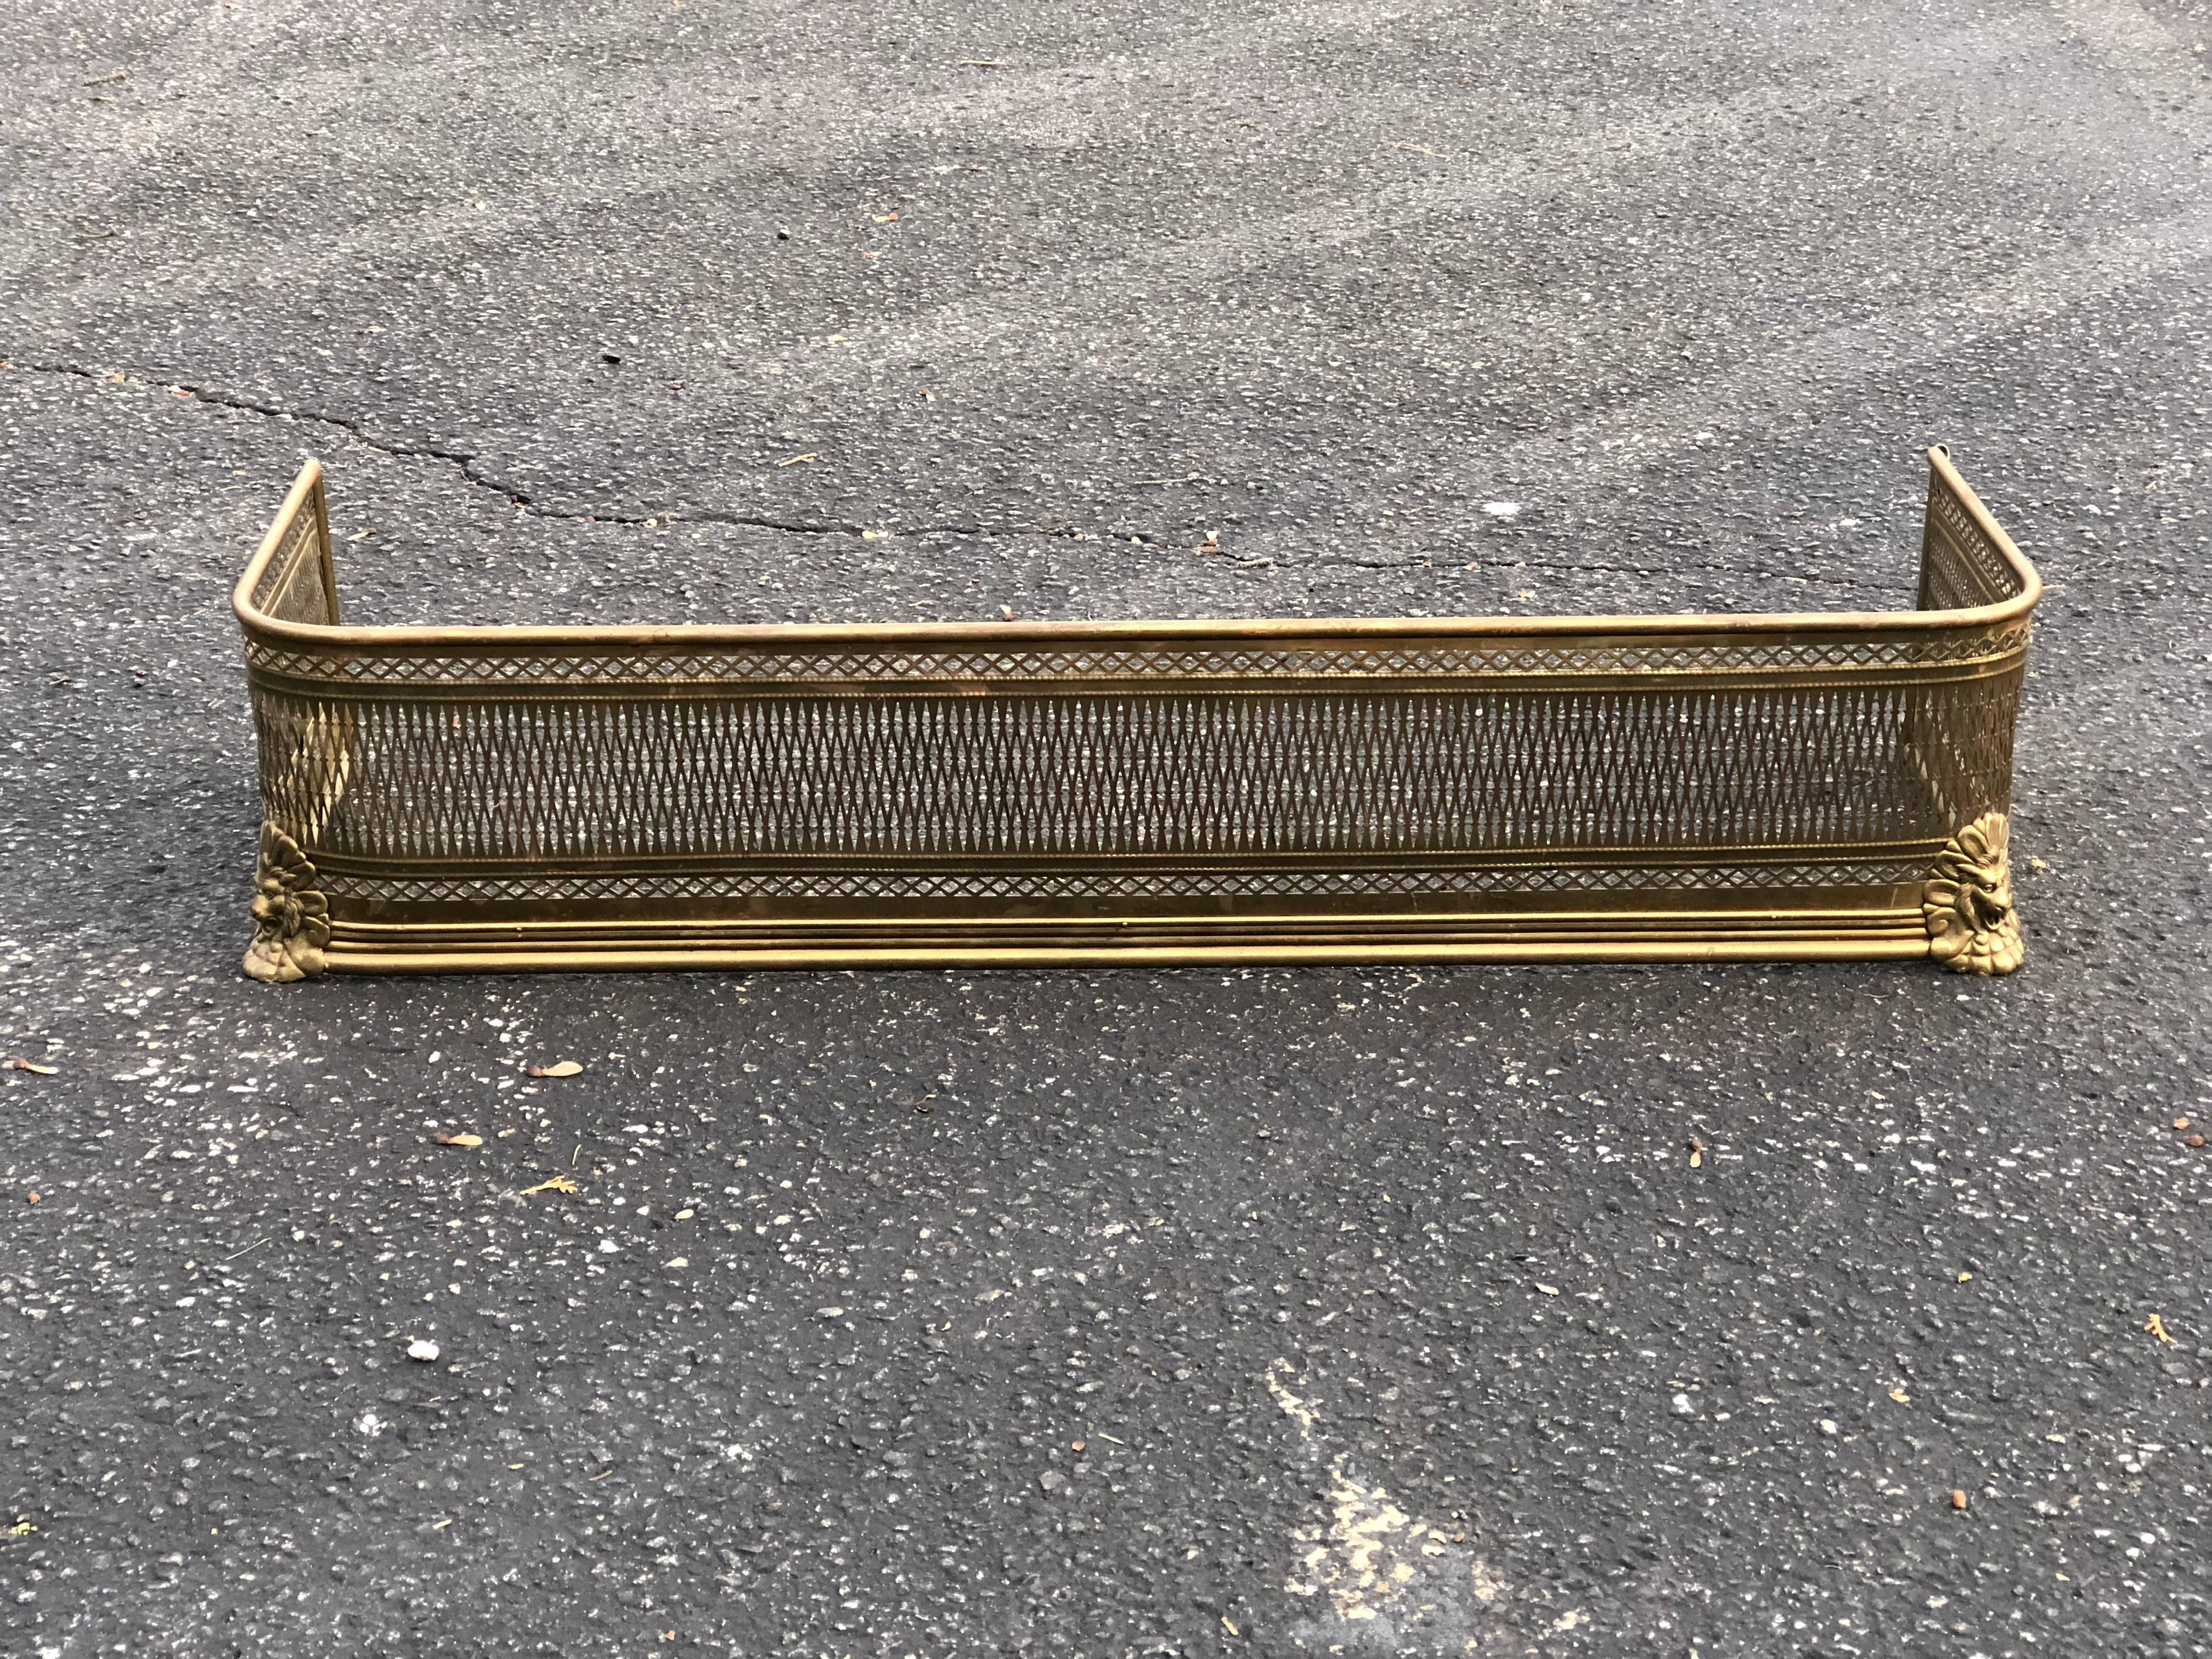 Pierced Brass Fireplace Fender with Lions. Nice polished Brass finish.Perfect decoration around your fireplace. 